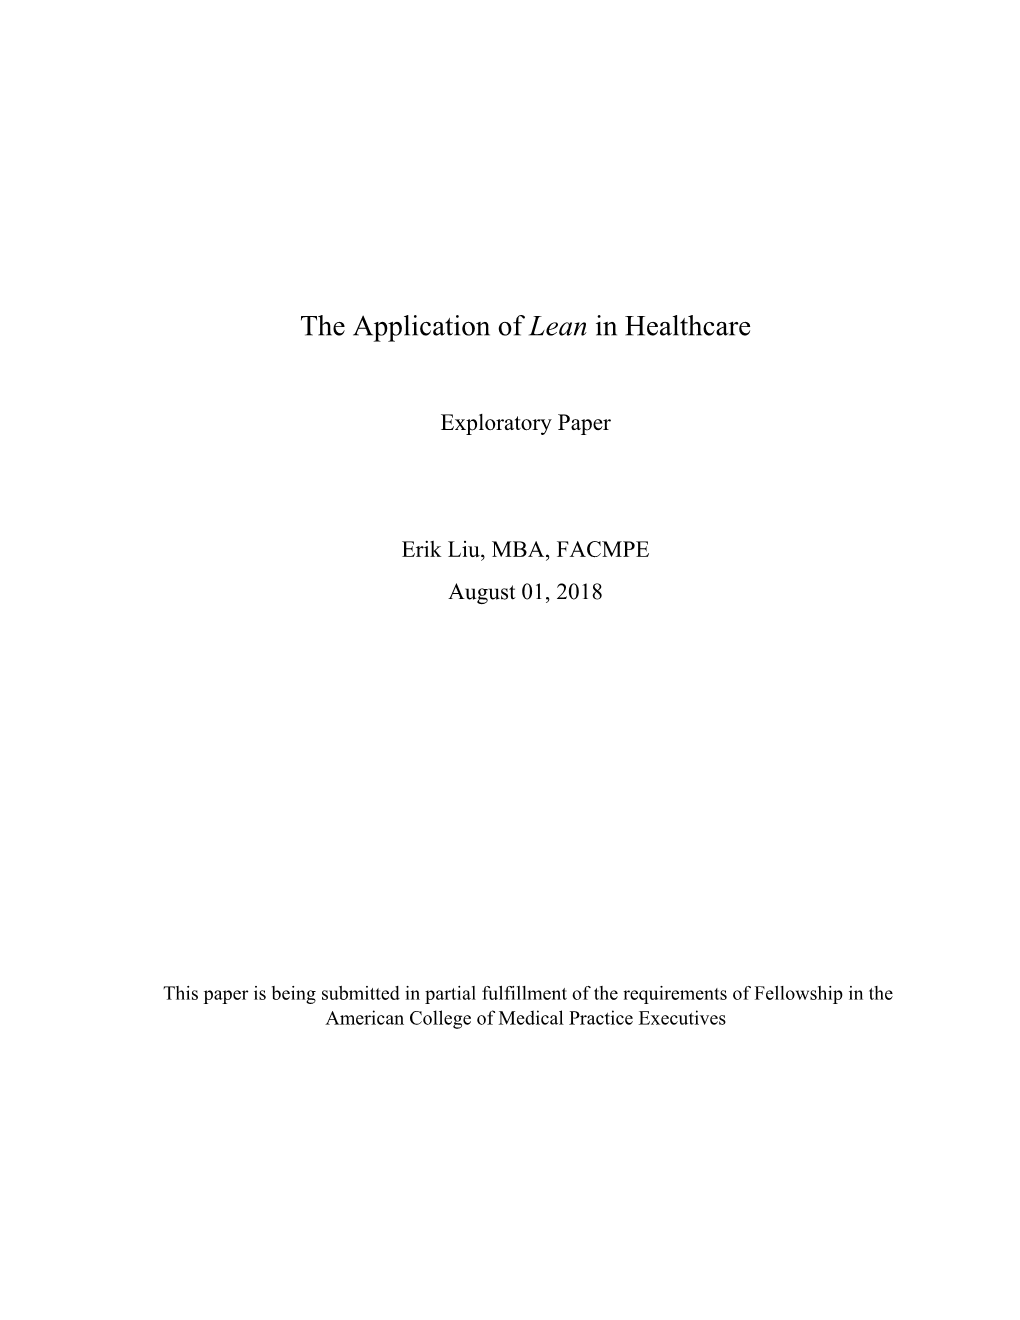 The Application of Lean in Healthcare